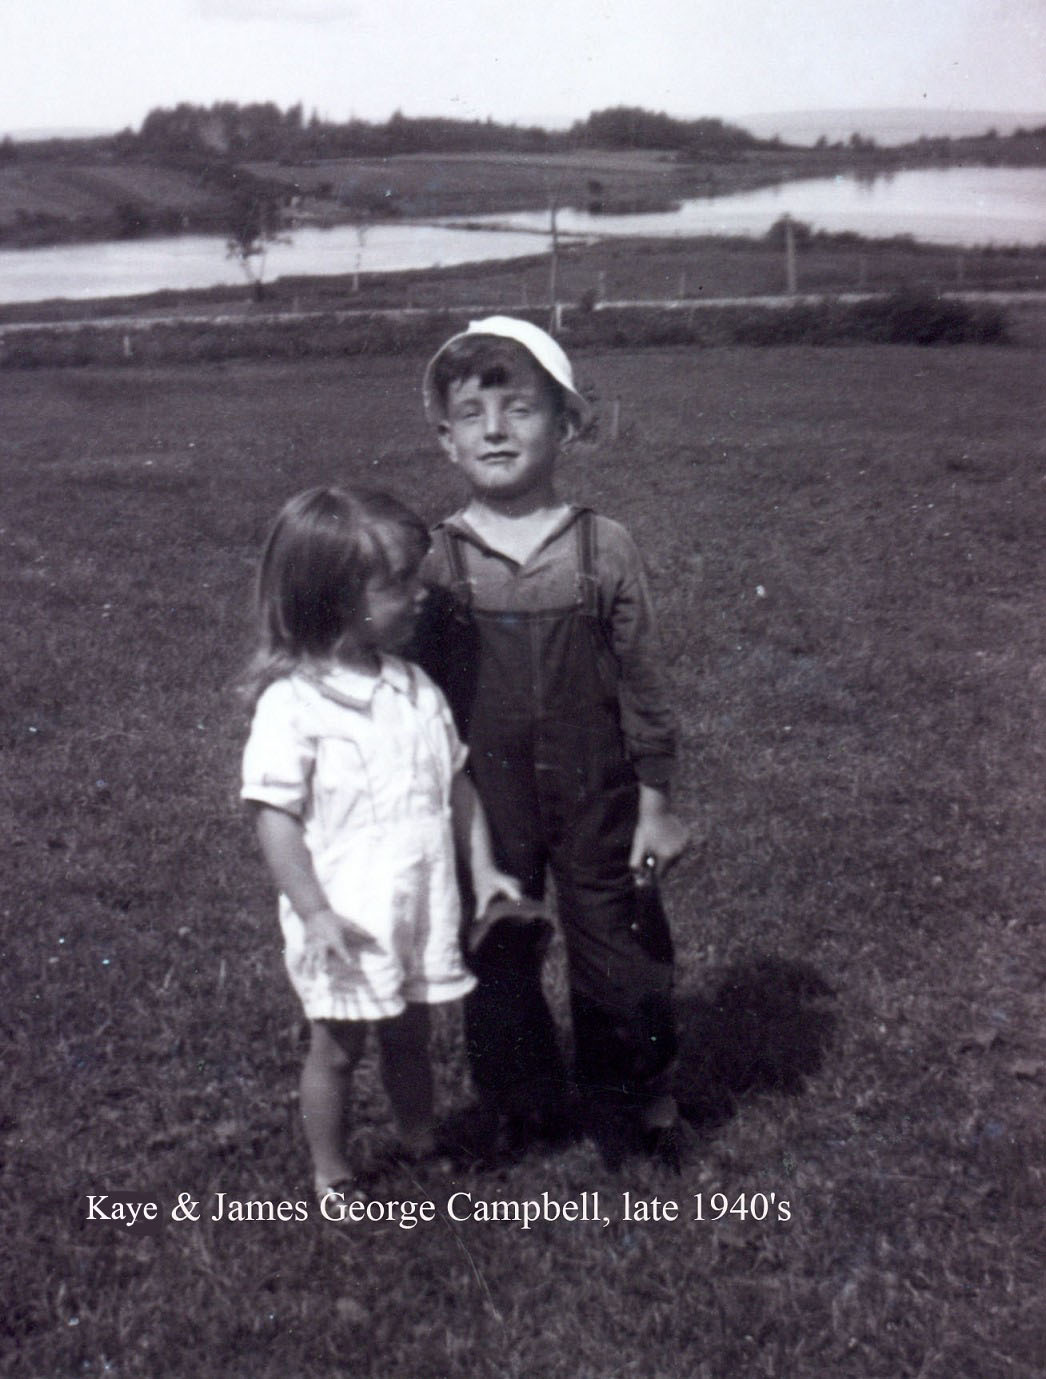 Kaye and James George Campbell, late 1940s